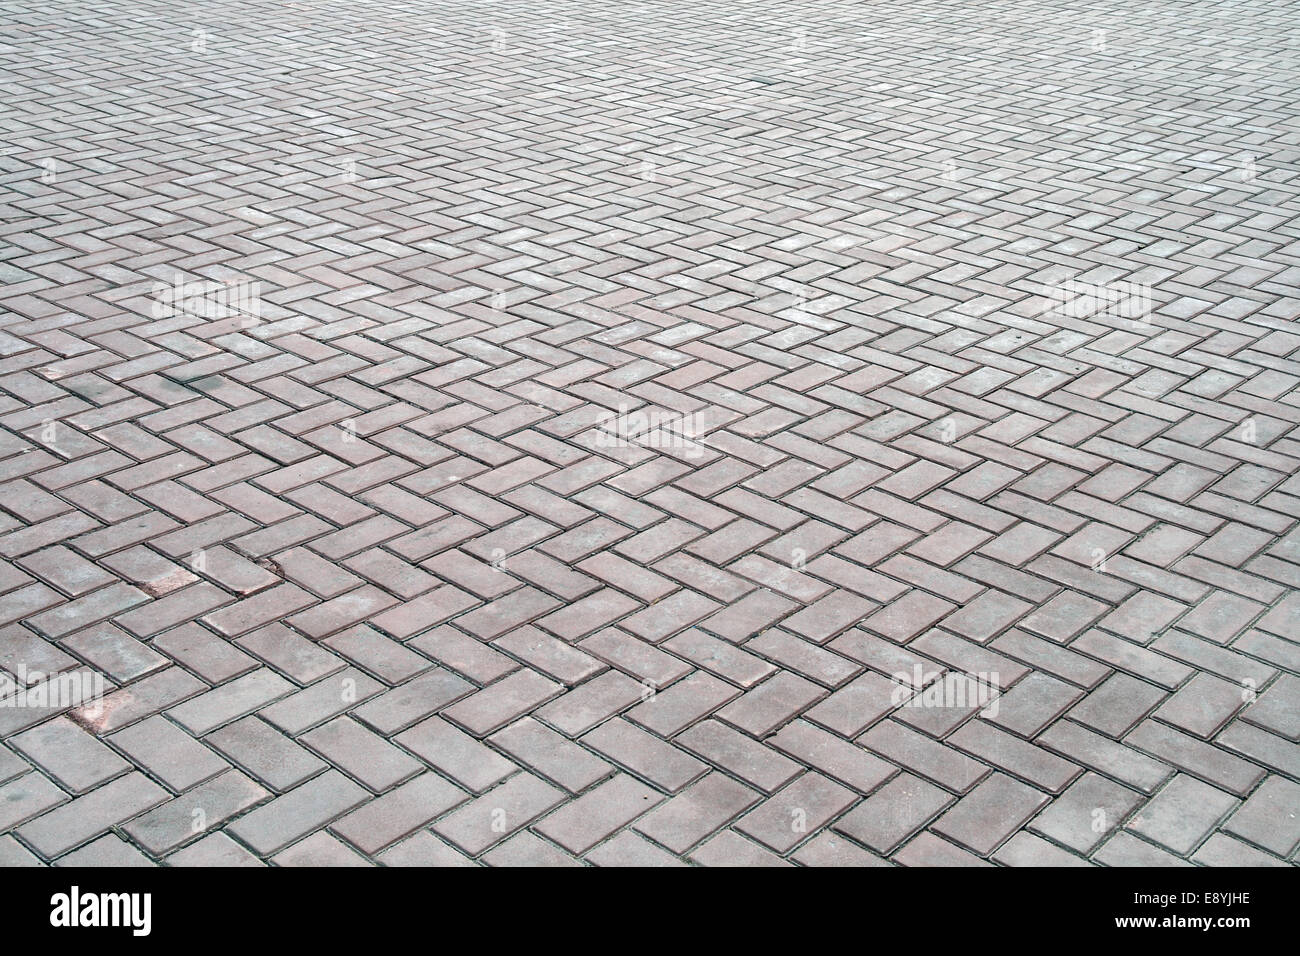 Roadway lined with concrete tiles Stock Photo